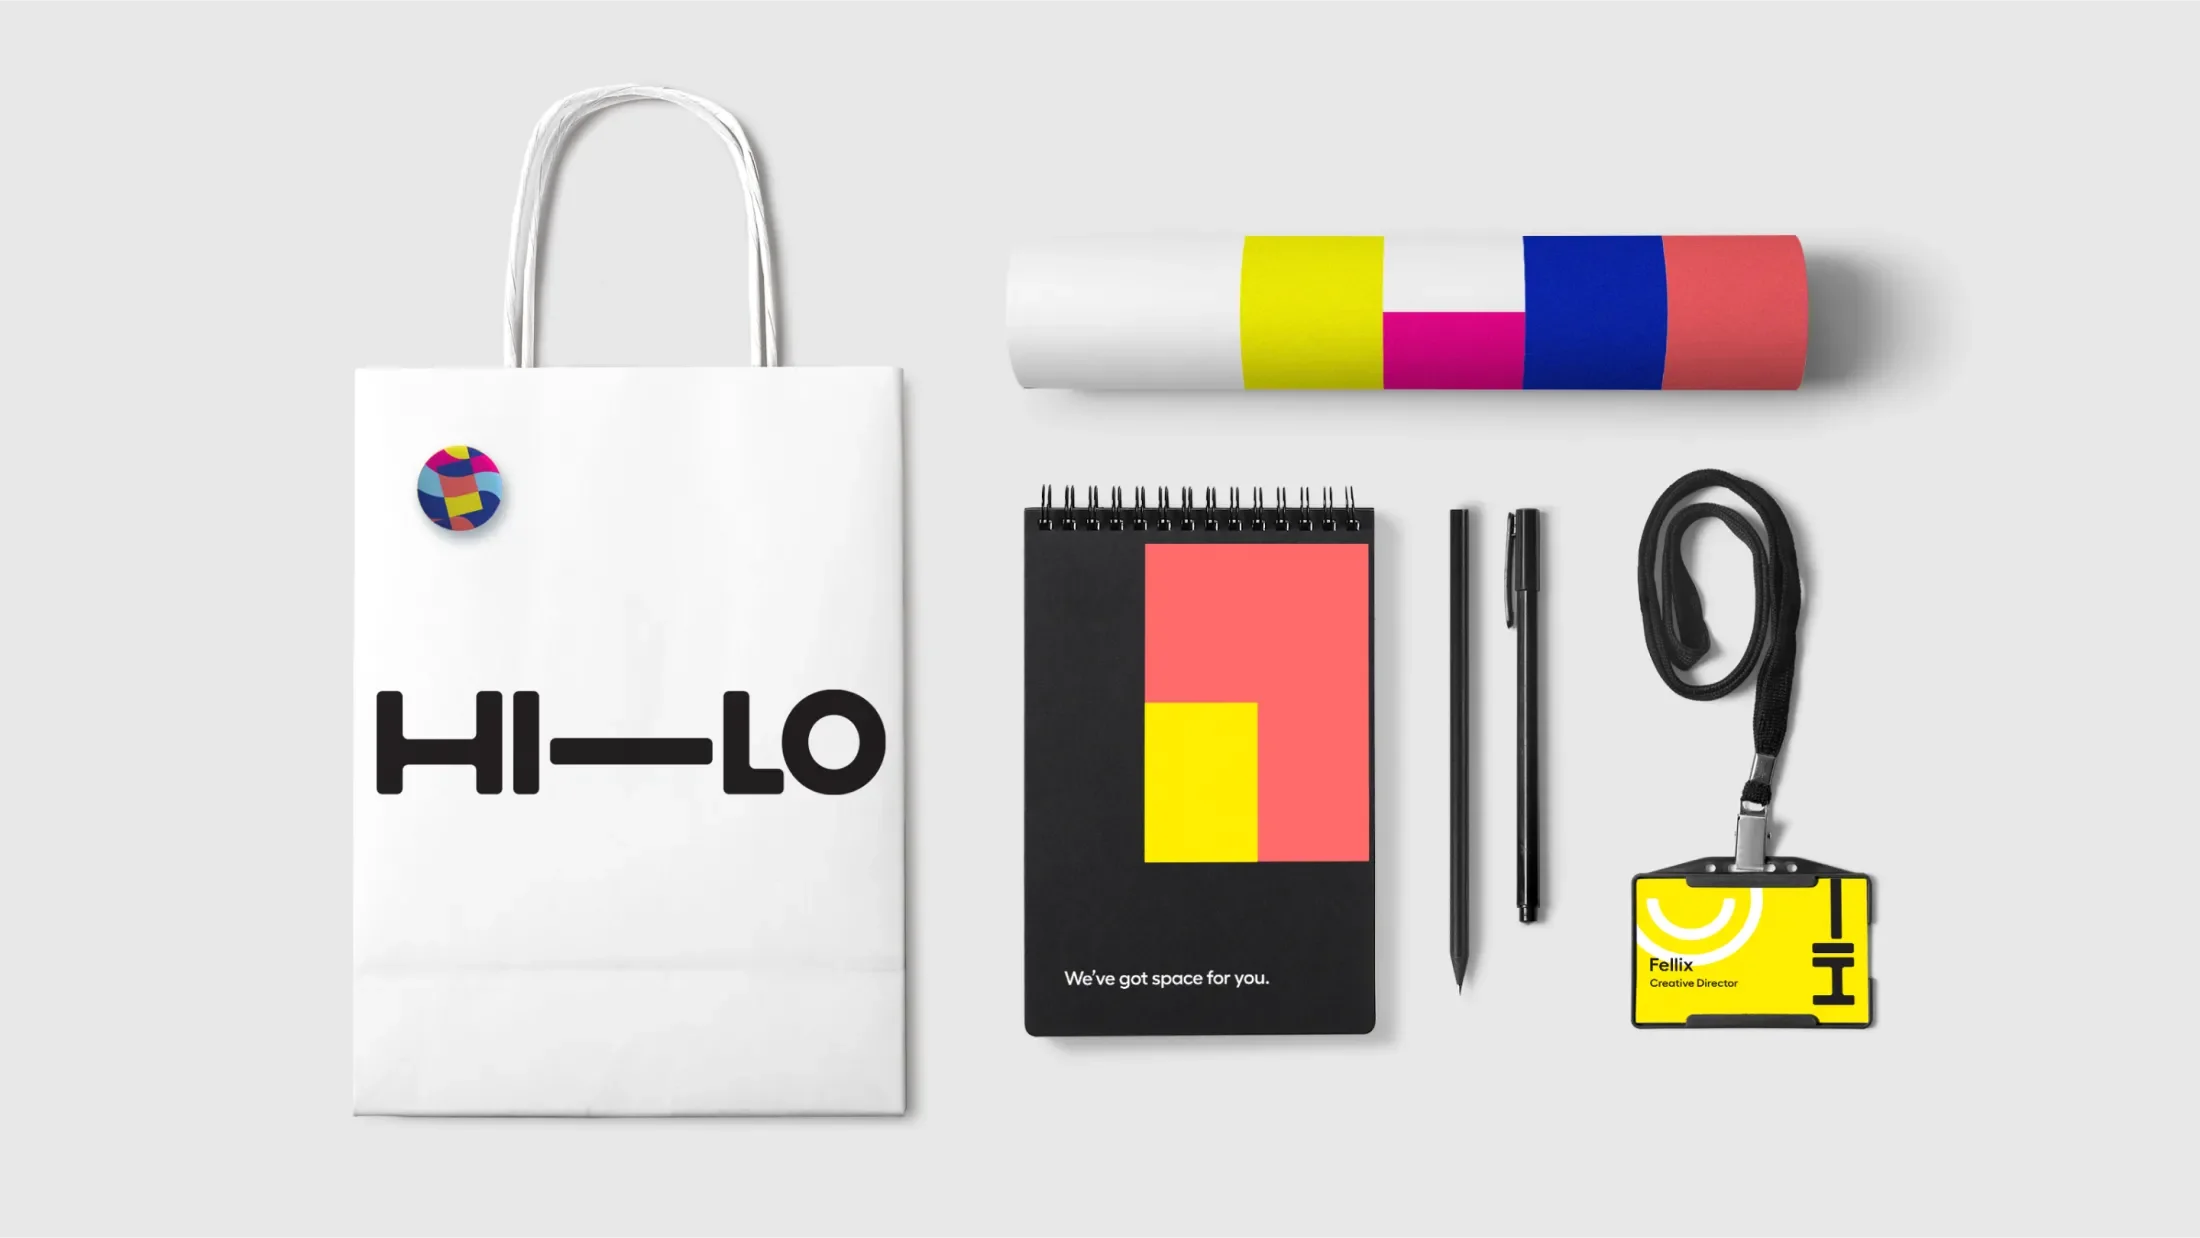 Spread of Hi-Lo themed stationary, including a bag, notepag, namebadge, pens, colored tube and a button